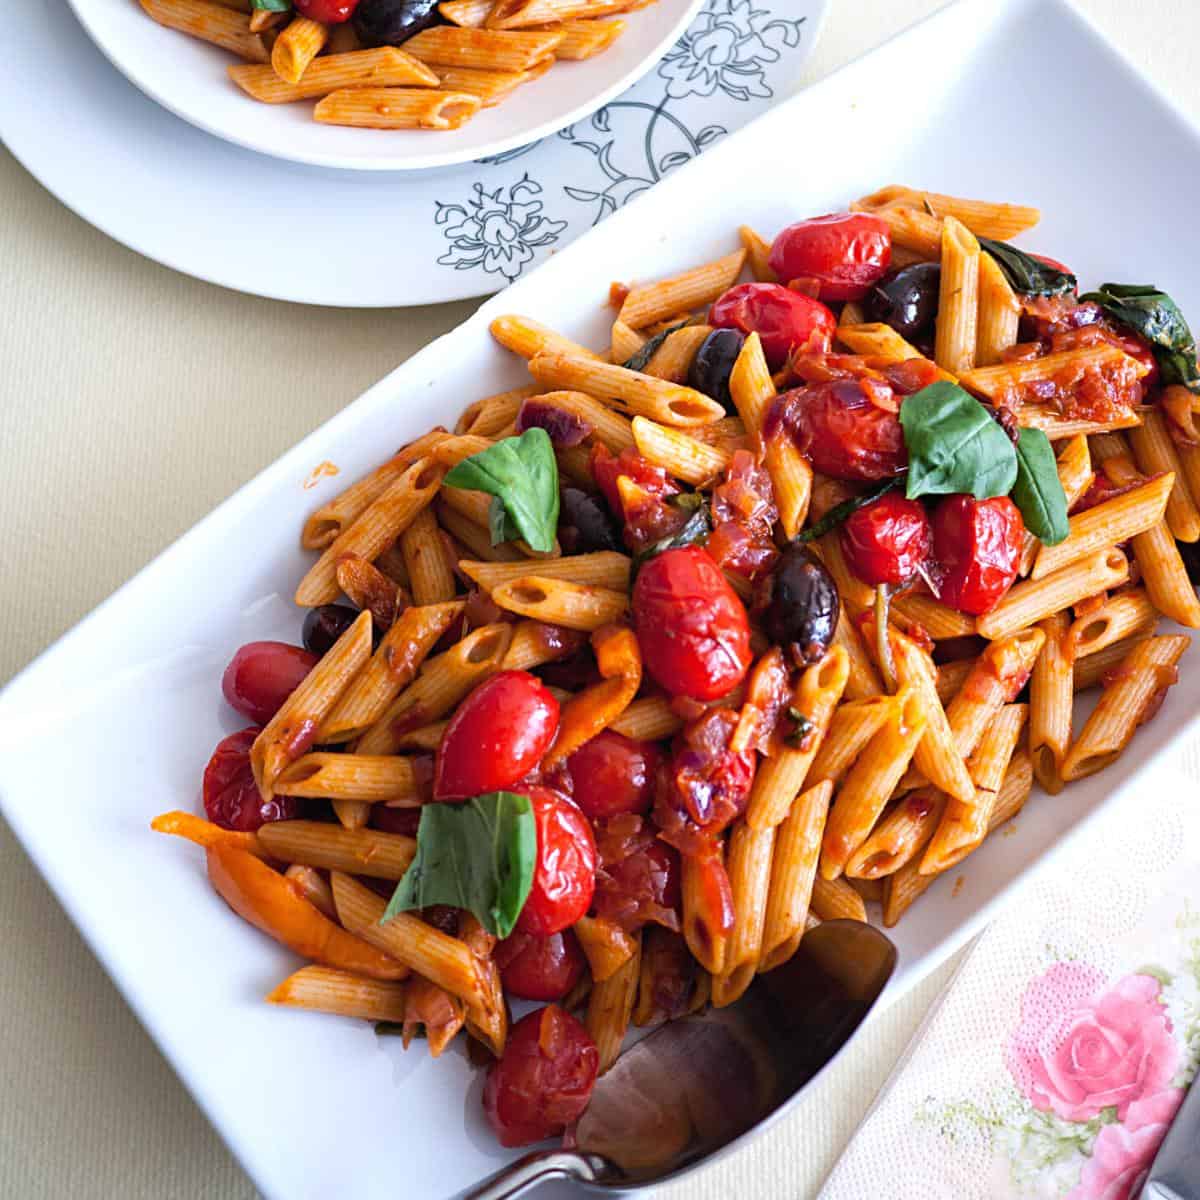 A tray with pasta tomatoes and olives.